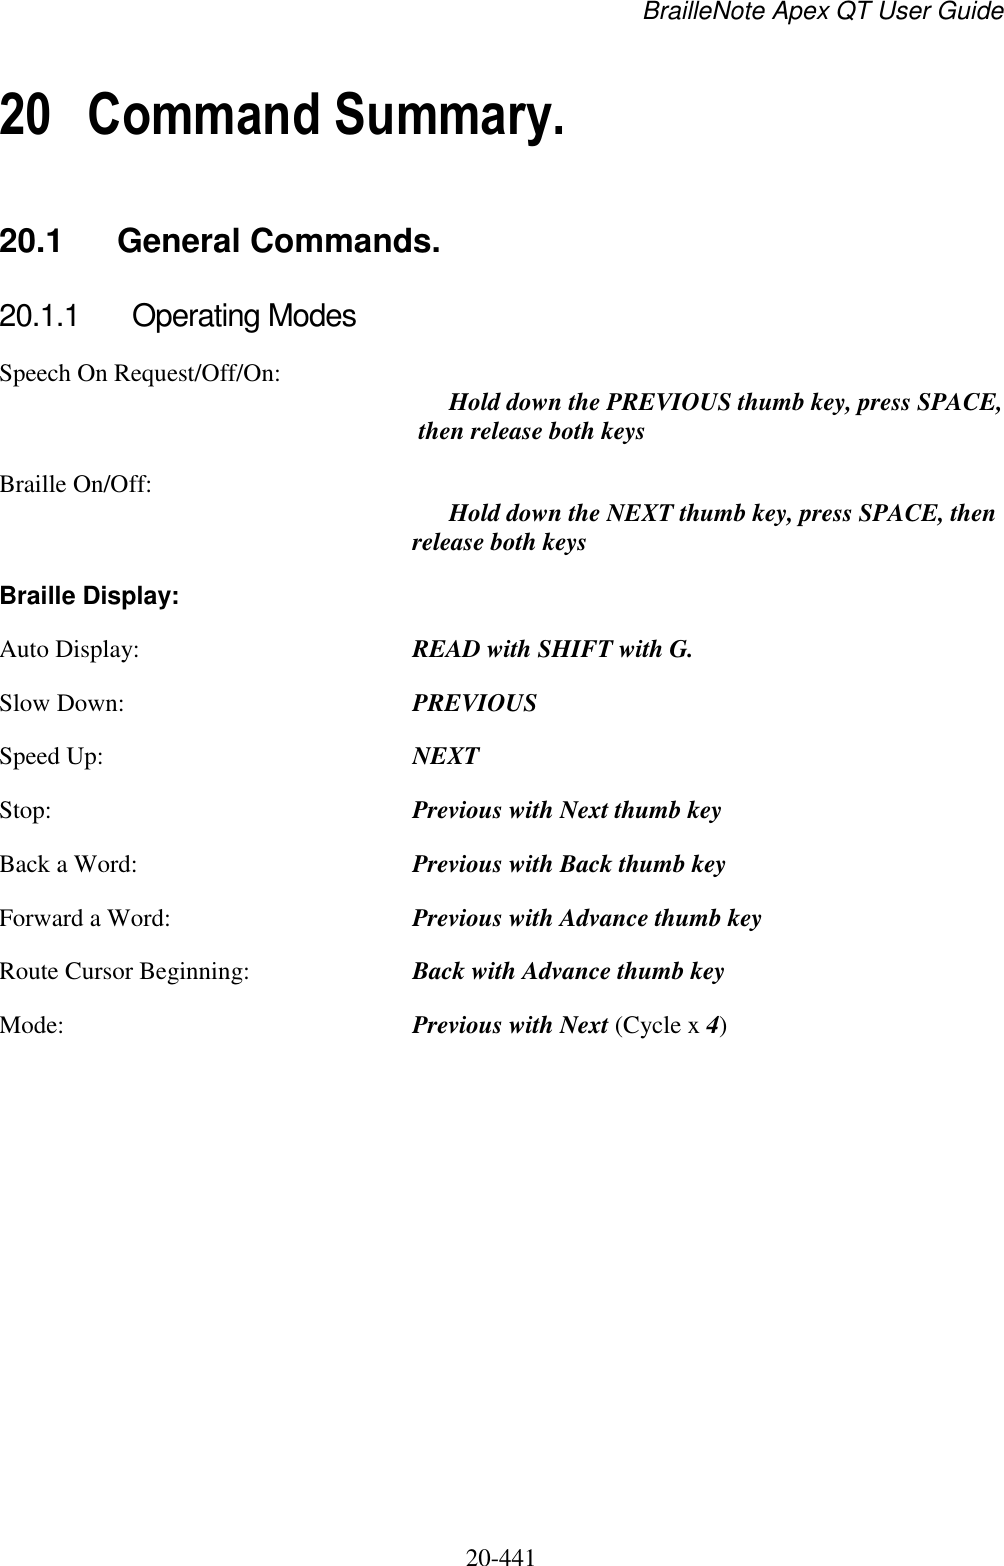 BrailleNote Apex QT User Guide  20-441   20 Command Summary. 20.1  General Commands. 20.1.1  Operating Modes Speech On Request/Off/On:   Hold down the PREVIOUS thumb key, press SPACE, then release both keys  Braille On/Off:   Hold down the NEXT thumb key, press SPACE, then release both keys Braille Display: Auto Display:  READ with SHIFT with G. Slow Down:  PREVIOUS Speed Up:  NEXT Stop:  Previous with Next thumb key Back a Word:  Previous with Back thumb key Forward a Word:  Previous with Advance thumb key Route Cursor Beginning:  Back with Advance thumb key Mode:  Previous with Next (Cycle x 4)    